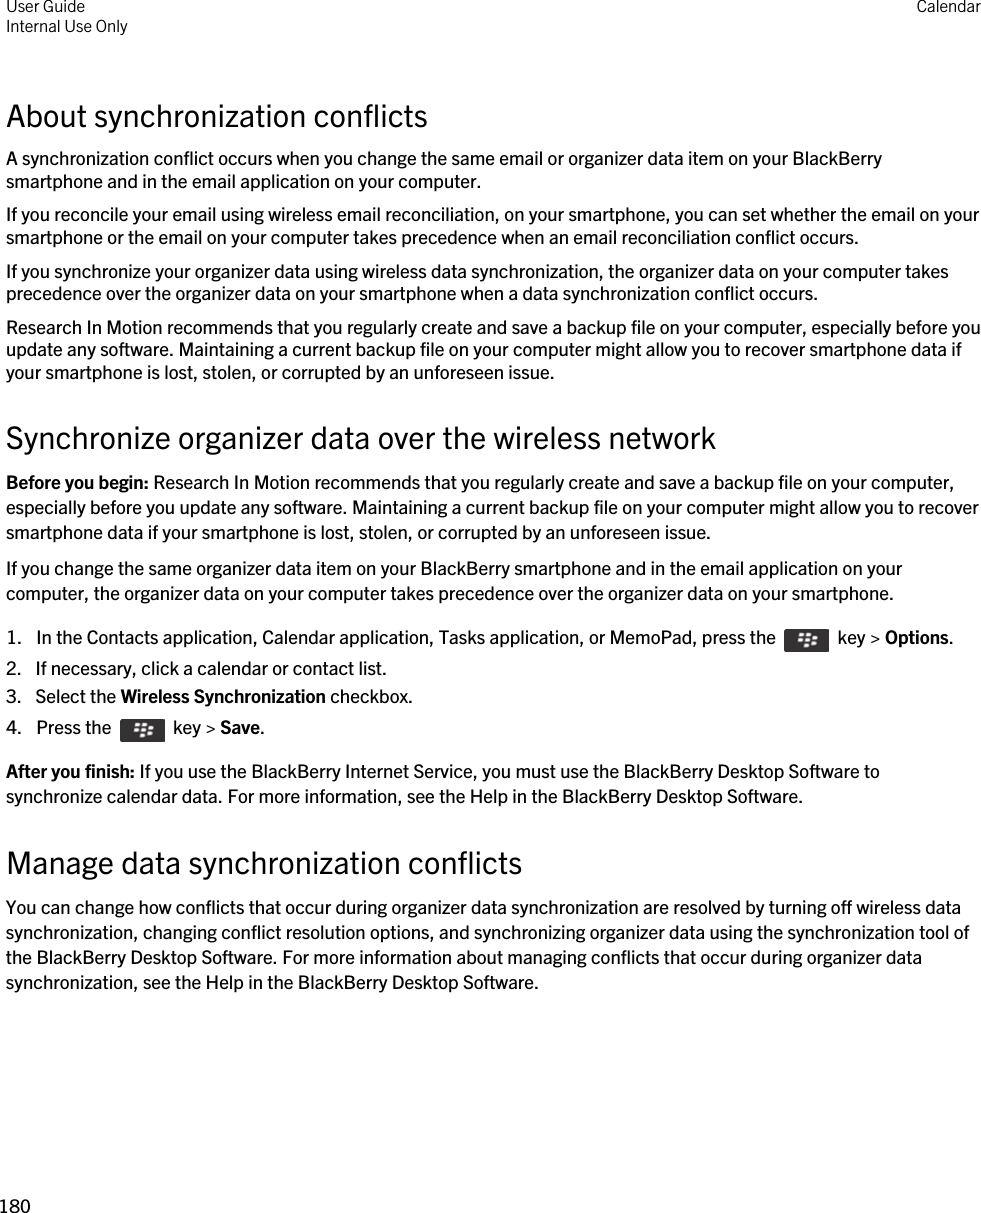 About synchronization conflictsA synchronization conflict occurs when you change the same email or organizer data item on your BlackBerry smartphone and in the email application on your computer.If you reconcile your email using wireless email reconciliation, on your smartphone, you can set whether the email on your smartphone or the email on your computer takes precedence when an email reconciliation conflict occurs.If you synchronize your organizer data using wireless data synchronization, the organizer data on your computer takes precedence over the organizer data on your smartphone when a data synchronization conflict occurs.Research In Motion recommends that you regularly create and save a backup file on your computer, especially before you update any software. Maintaining a current backup file on your computer might allow you to recover smartphone data if your smartphone is lost, stolen, or corrupted by an unforeseen issue.Synchronize organizer data over the wireless networkBefore you begin: Research In Motion recommends that you regularly create and save a backup file on your computer, especially before you update any software. Maintaining a current backup file on your computer might allow you to recover smartphone data if your smartphone is lost, stolen, or corrupted by an unforeseen issue.If you change the same organizer data item on your BlackBerry smartphone and in the email application on your computer, the organizer data on your computer takes precedence over the organizer data on your smartphone.1.  In the Contacts application, Calendar application, Tasks application, or MemoPad, press the    key &gt; Options. 2. If necessary, click a calendar or contact list.3. Select the Wireless Synchronization checkbox.4.  Press the    key &gt; Save. After you finish: If you use the BlackBerry Internet Service, you must use the BlackBerry Desktop Software to synchronize calendar data. For more information, see the Help in the BlackBerry Desktop Software.Manage data synchronization conflictsYou can change how conflicts that occur during organizer data synchronization are resolved by turning off wireless data synchronization, changing conflict resolution options, and synchronizing organizer data using the synchronization tool of the BlackBerry Desktop Software. For more information about managing conflicts that occur during organizer data synchronization, see the Help in the BlackBerry Desktop Software.User GuideInternal Use Only Calendar180 